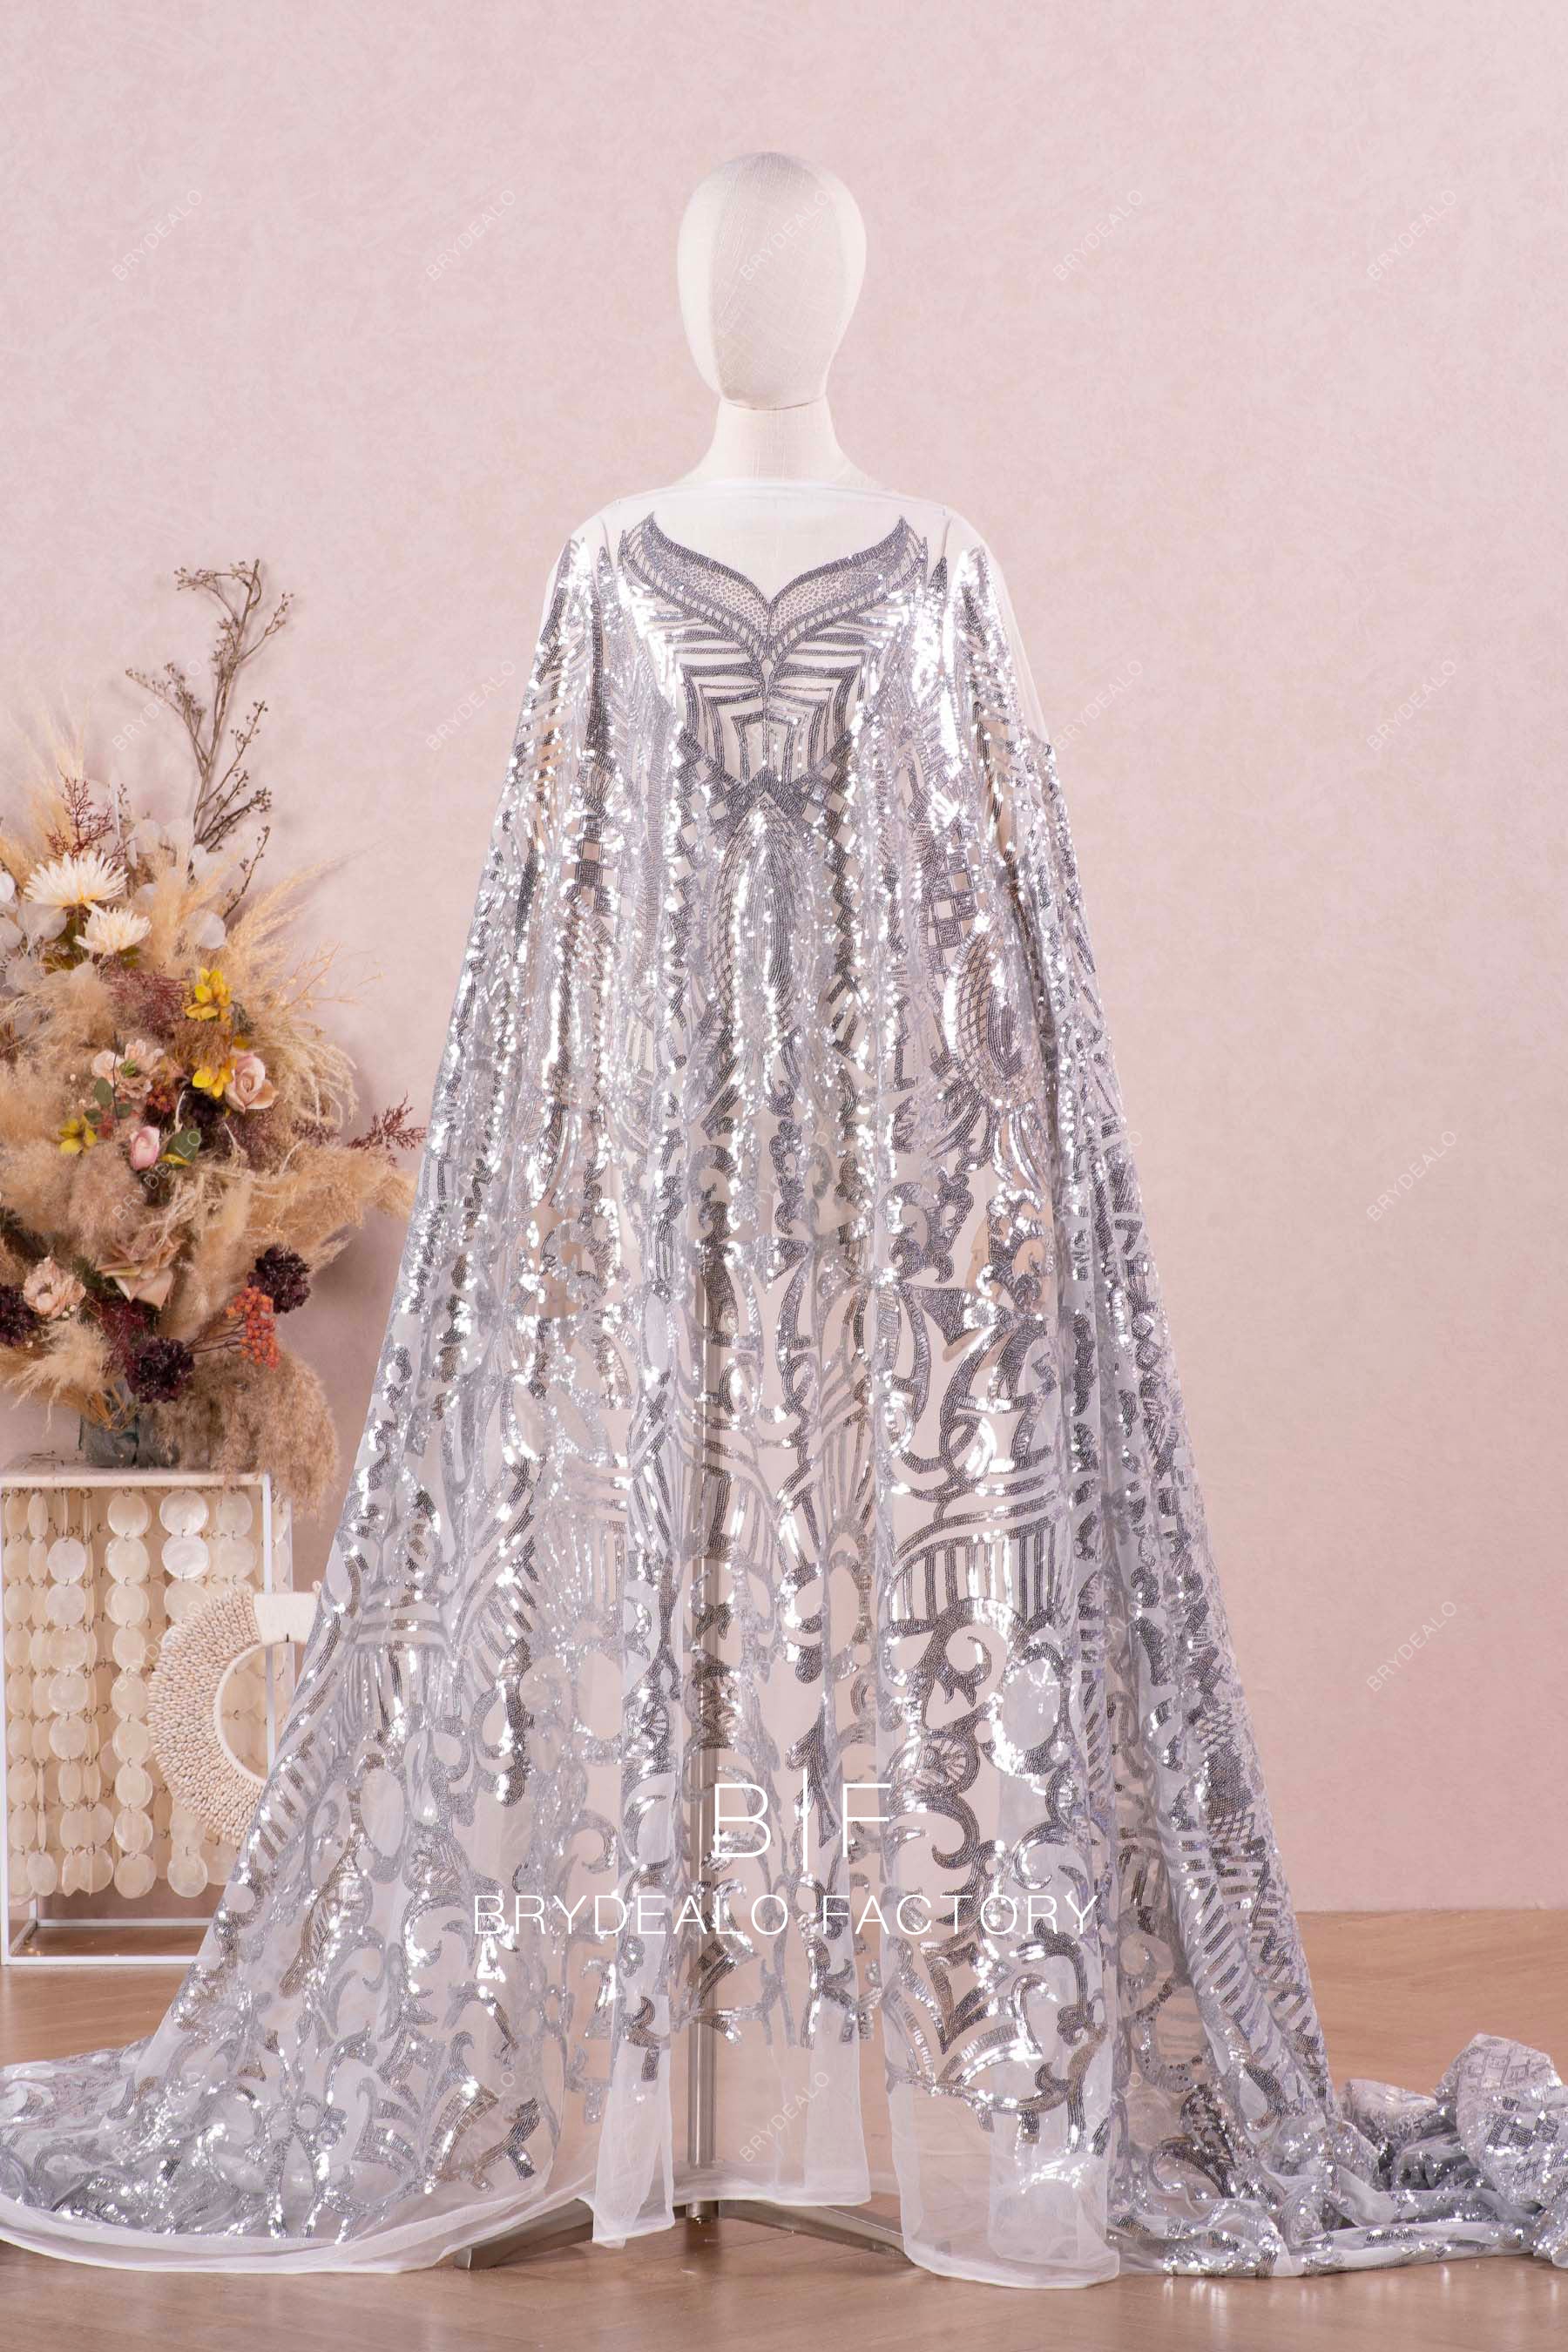 Tulle Wedding Dress Clothes, Silver Sequin Fabric Tulle